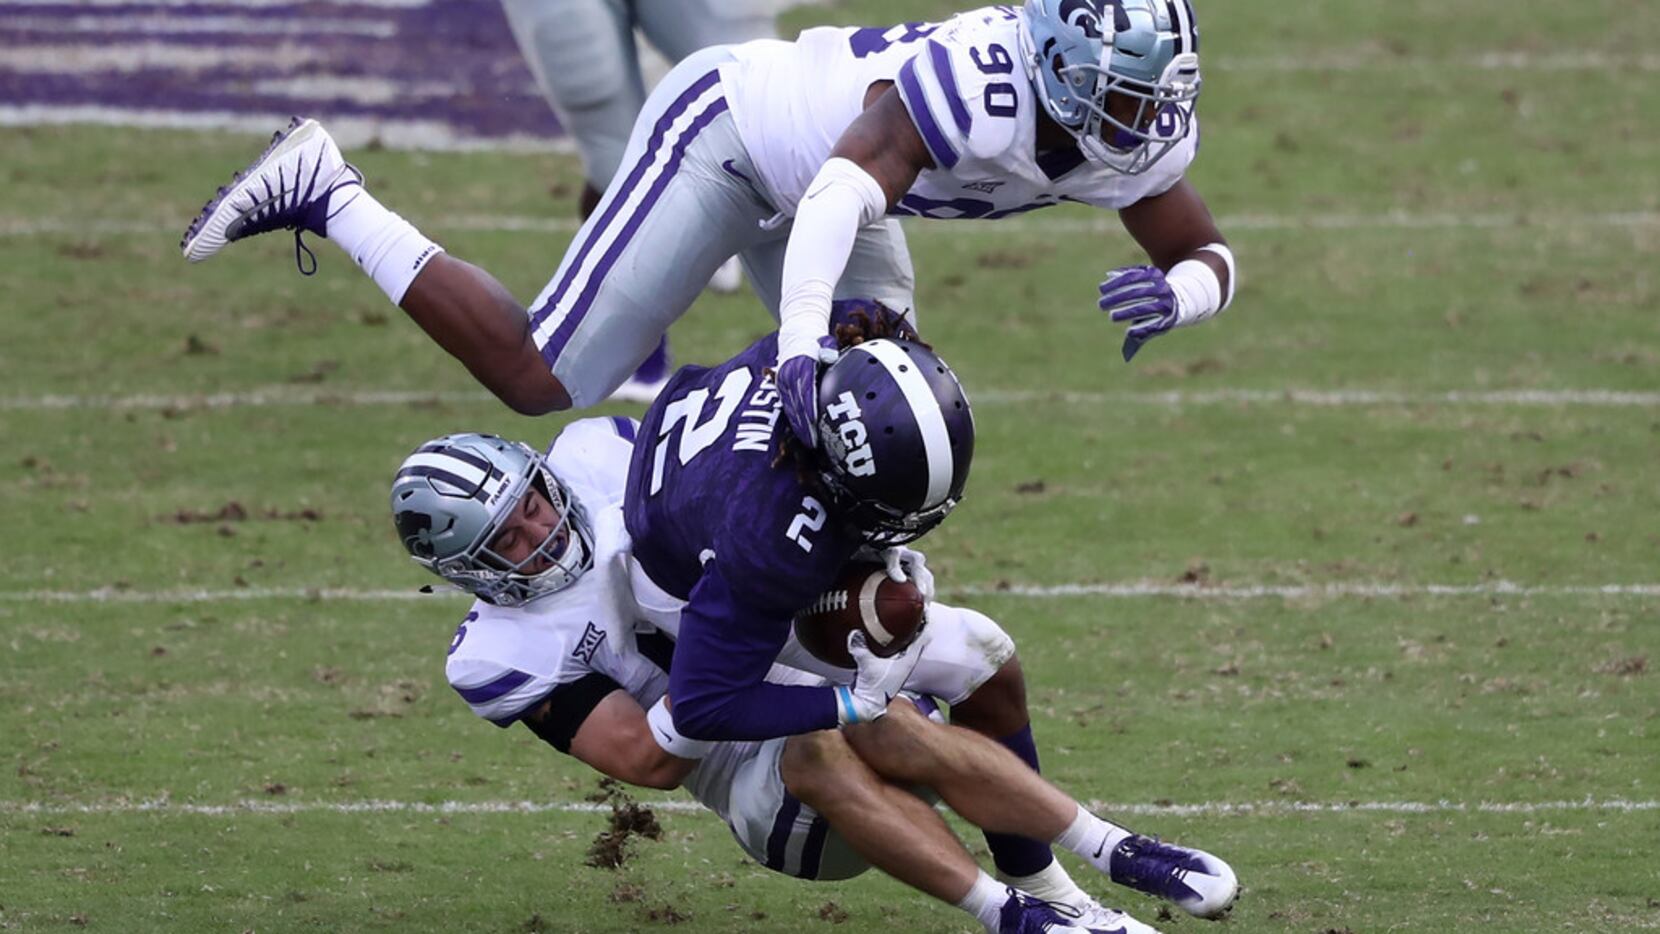 FORT WORTH, TEXAS - NOVEMBER 03:  Jaelan Austin #2 of the TCU Horned Frogs is tackled by...